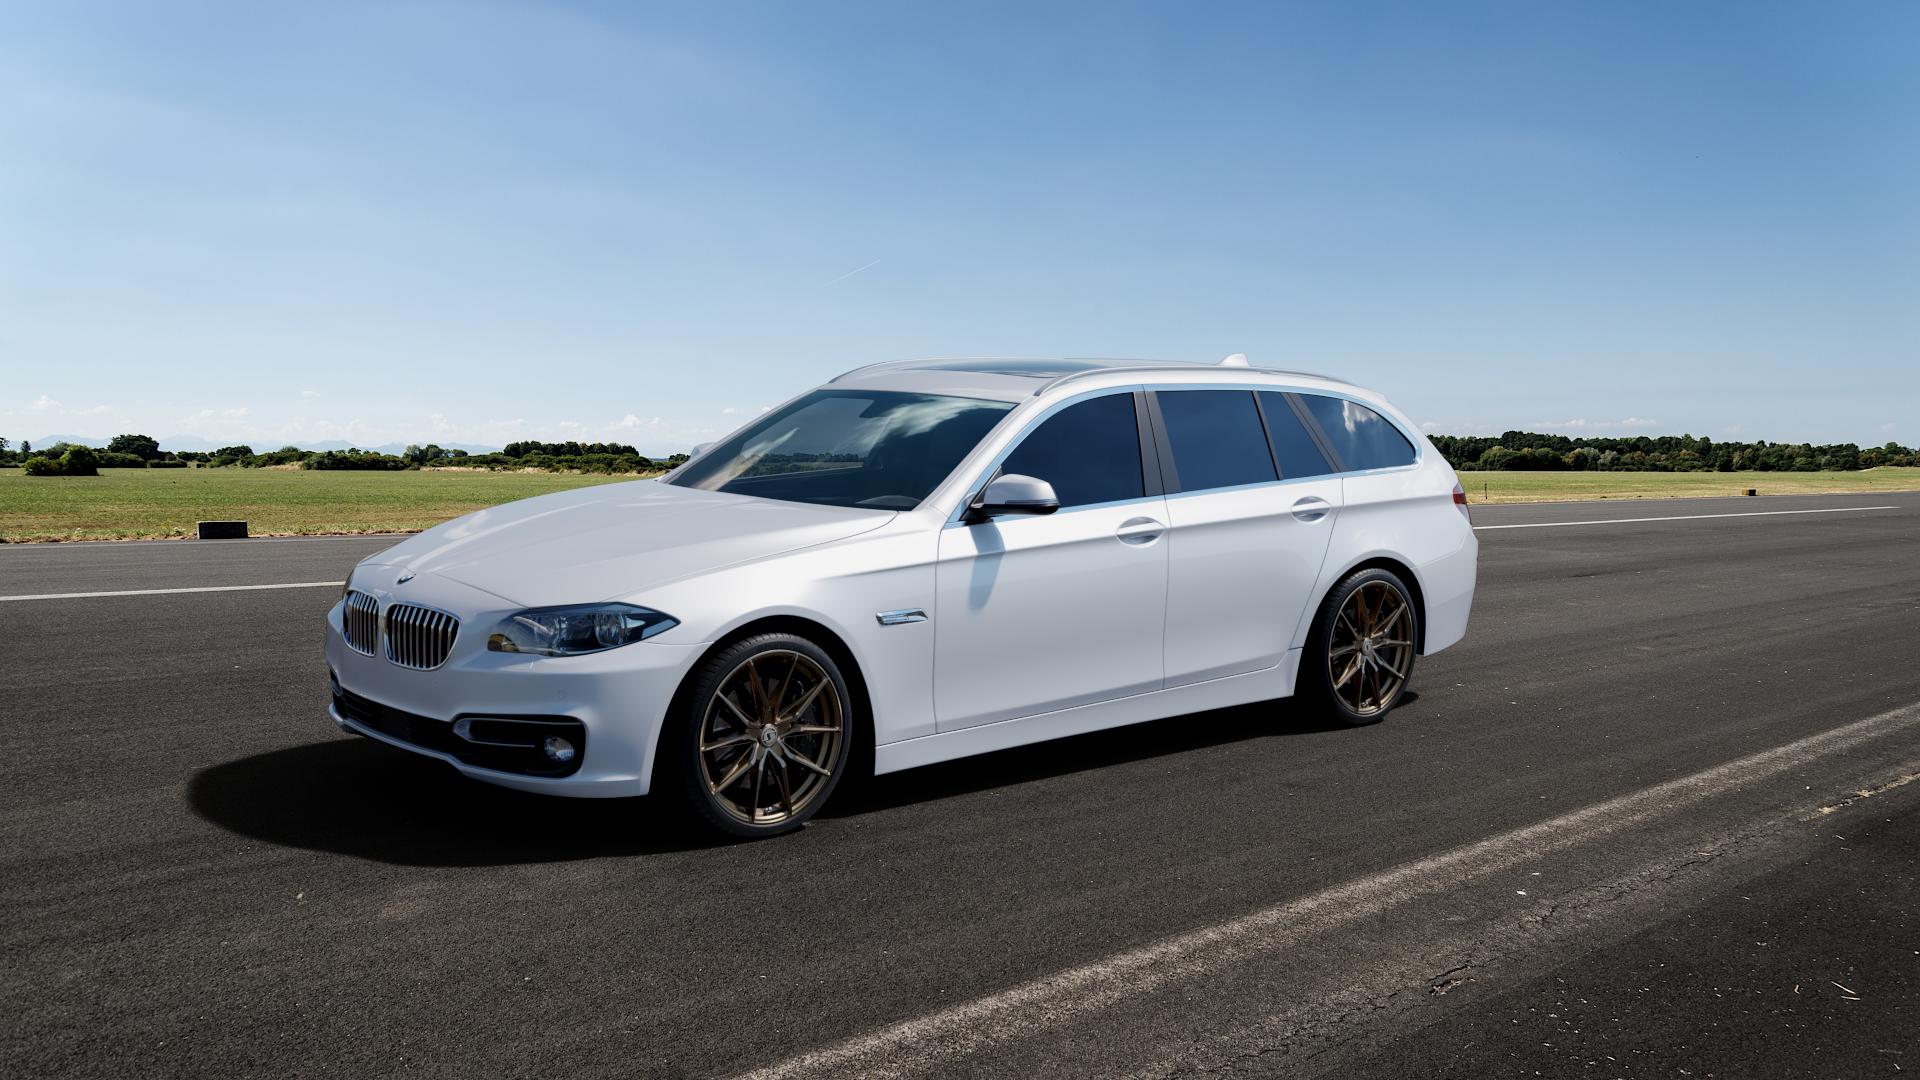 BMW 525d Type F11 (Touring) 3,0l D 150kW (204 hp) Wheels and Tyre Packages  | velonity.com